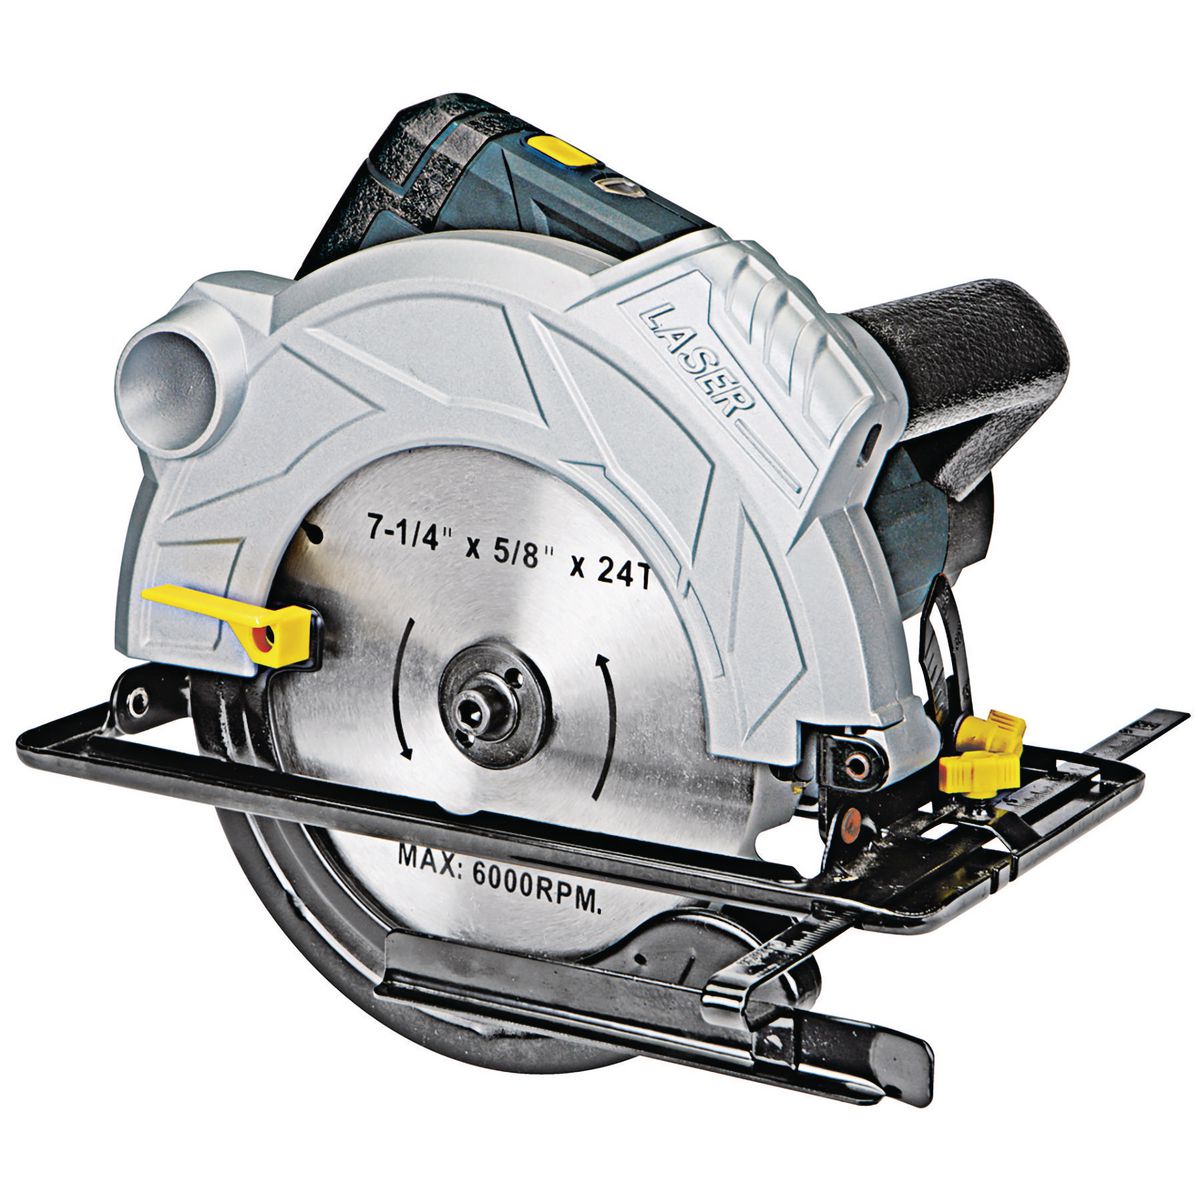 CHICAGO ELECTRIC 7-1/4 in. 12 Amp Professional Circular Saw With Laser